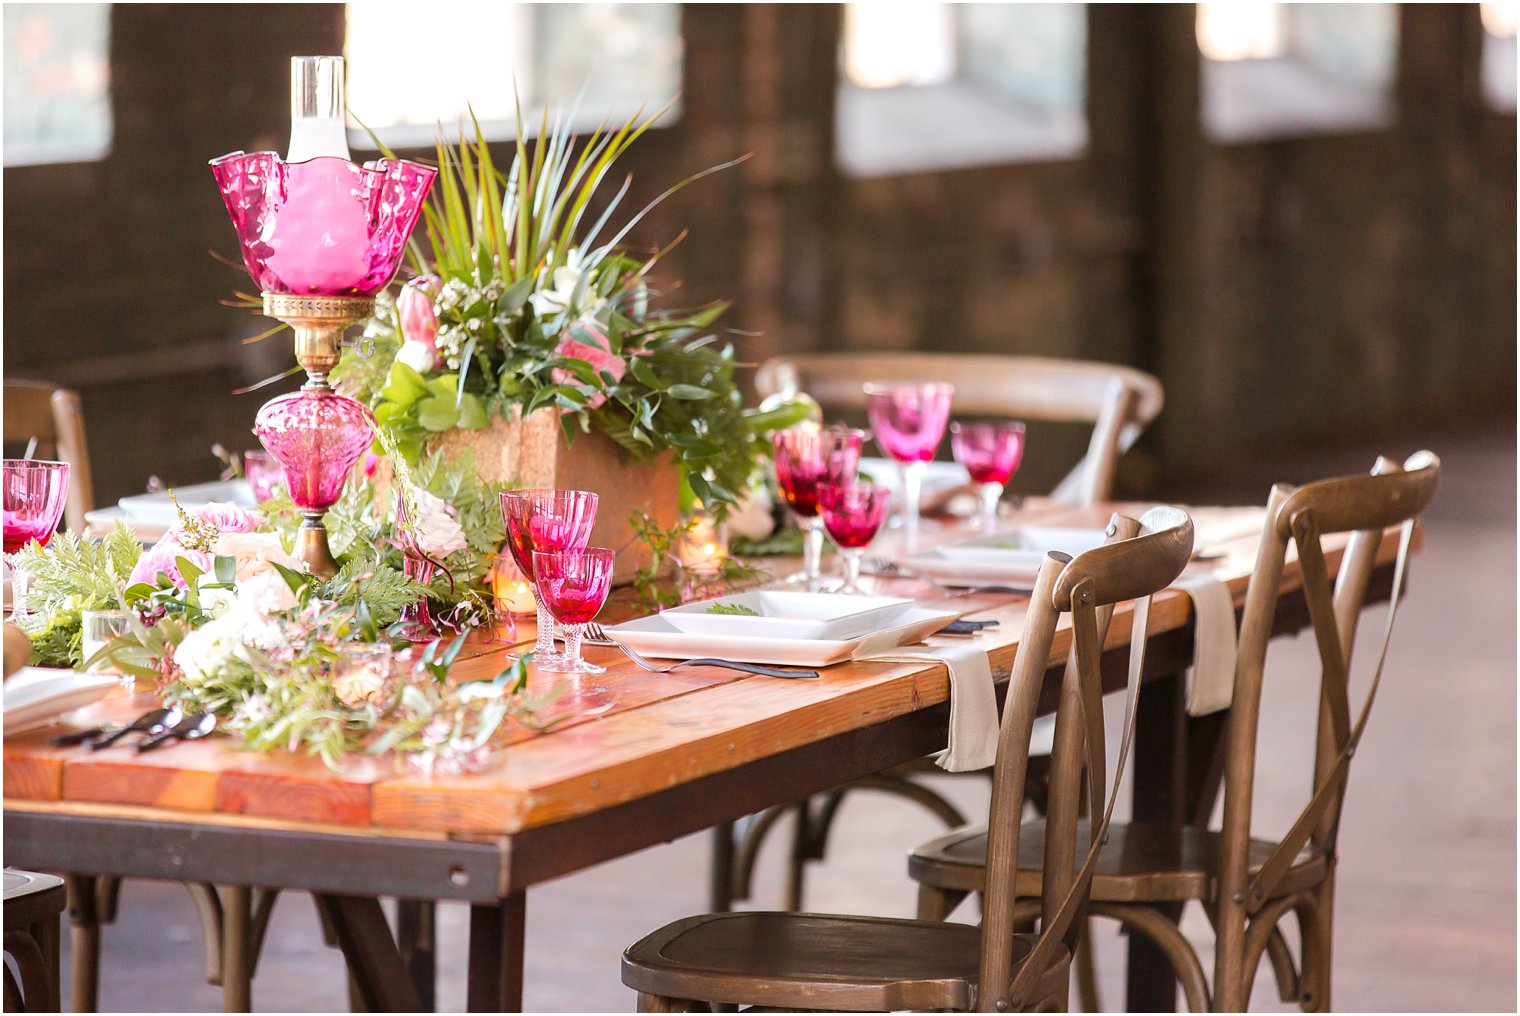 Tablescape with crossback chairs